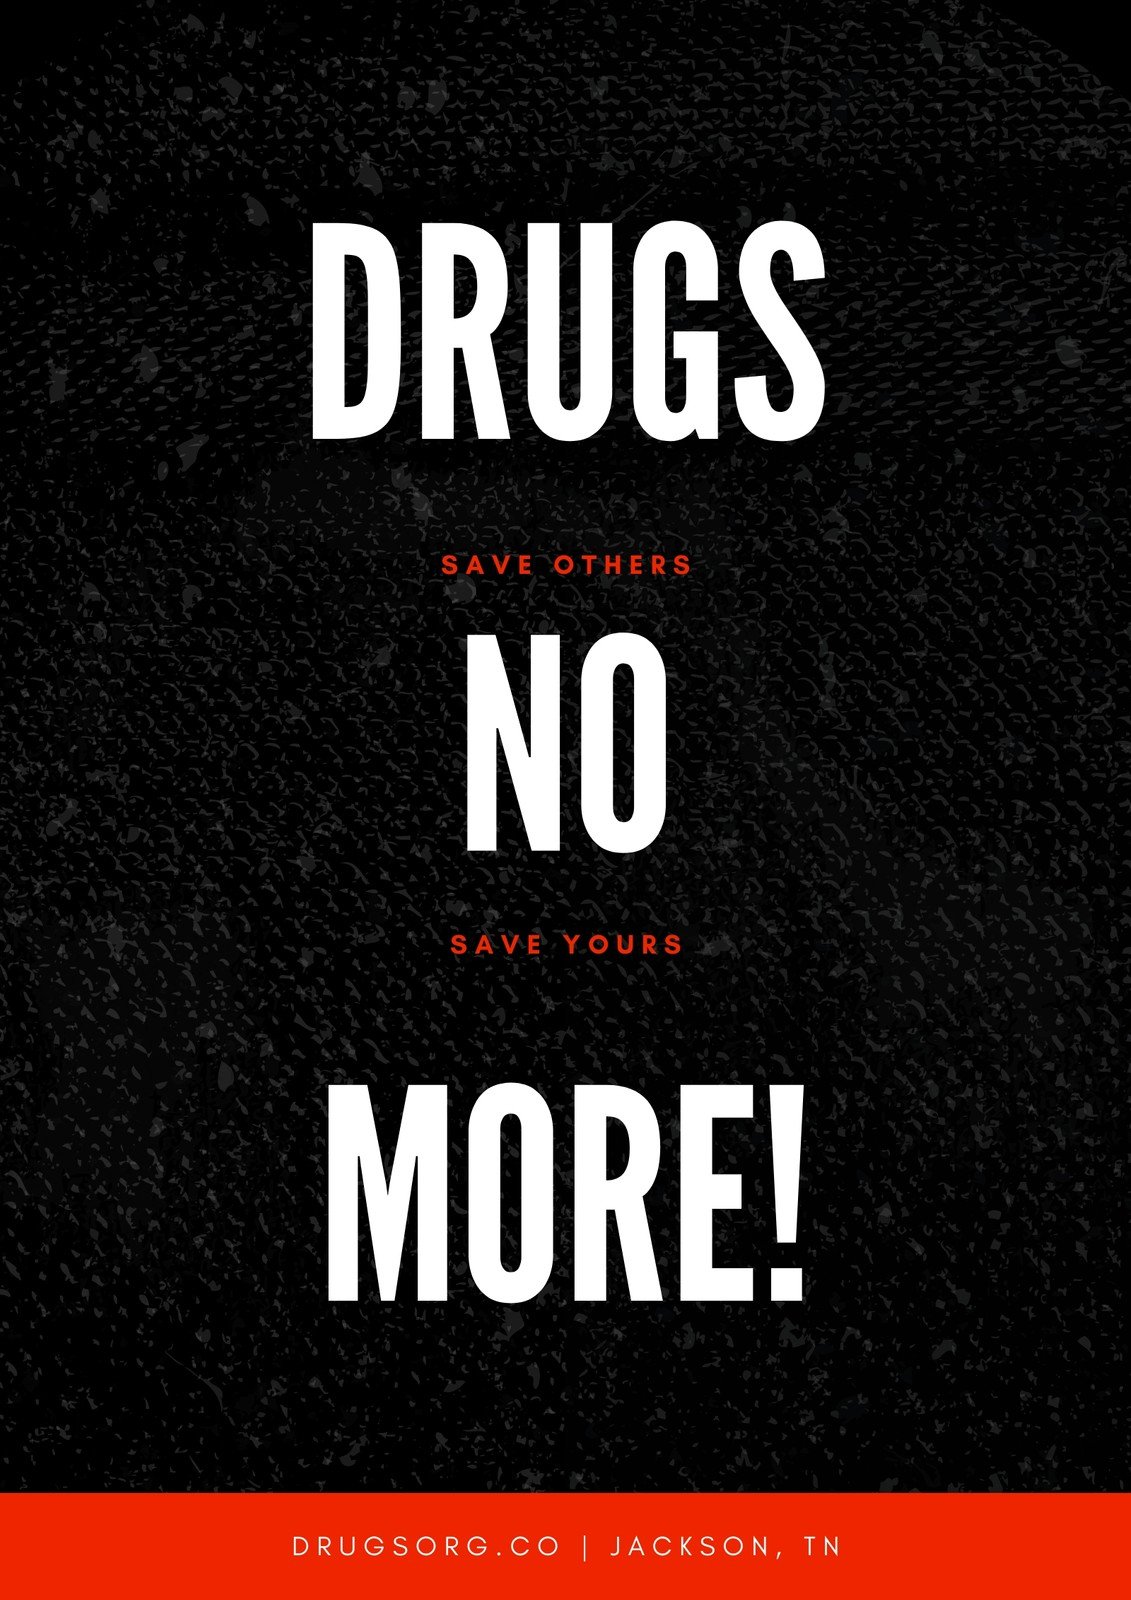 60 Anti Drug Slogans For Ad Campaign Raising Awareness On Abuse ...